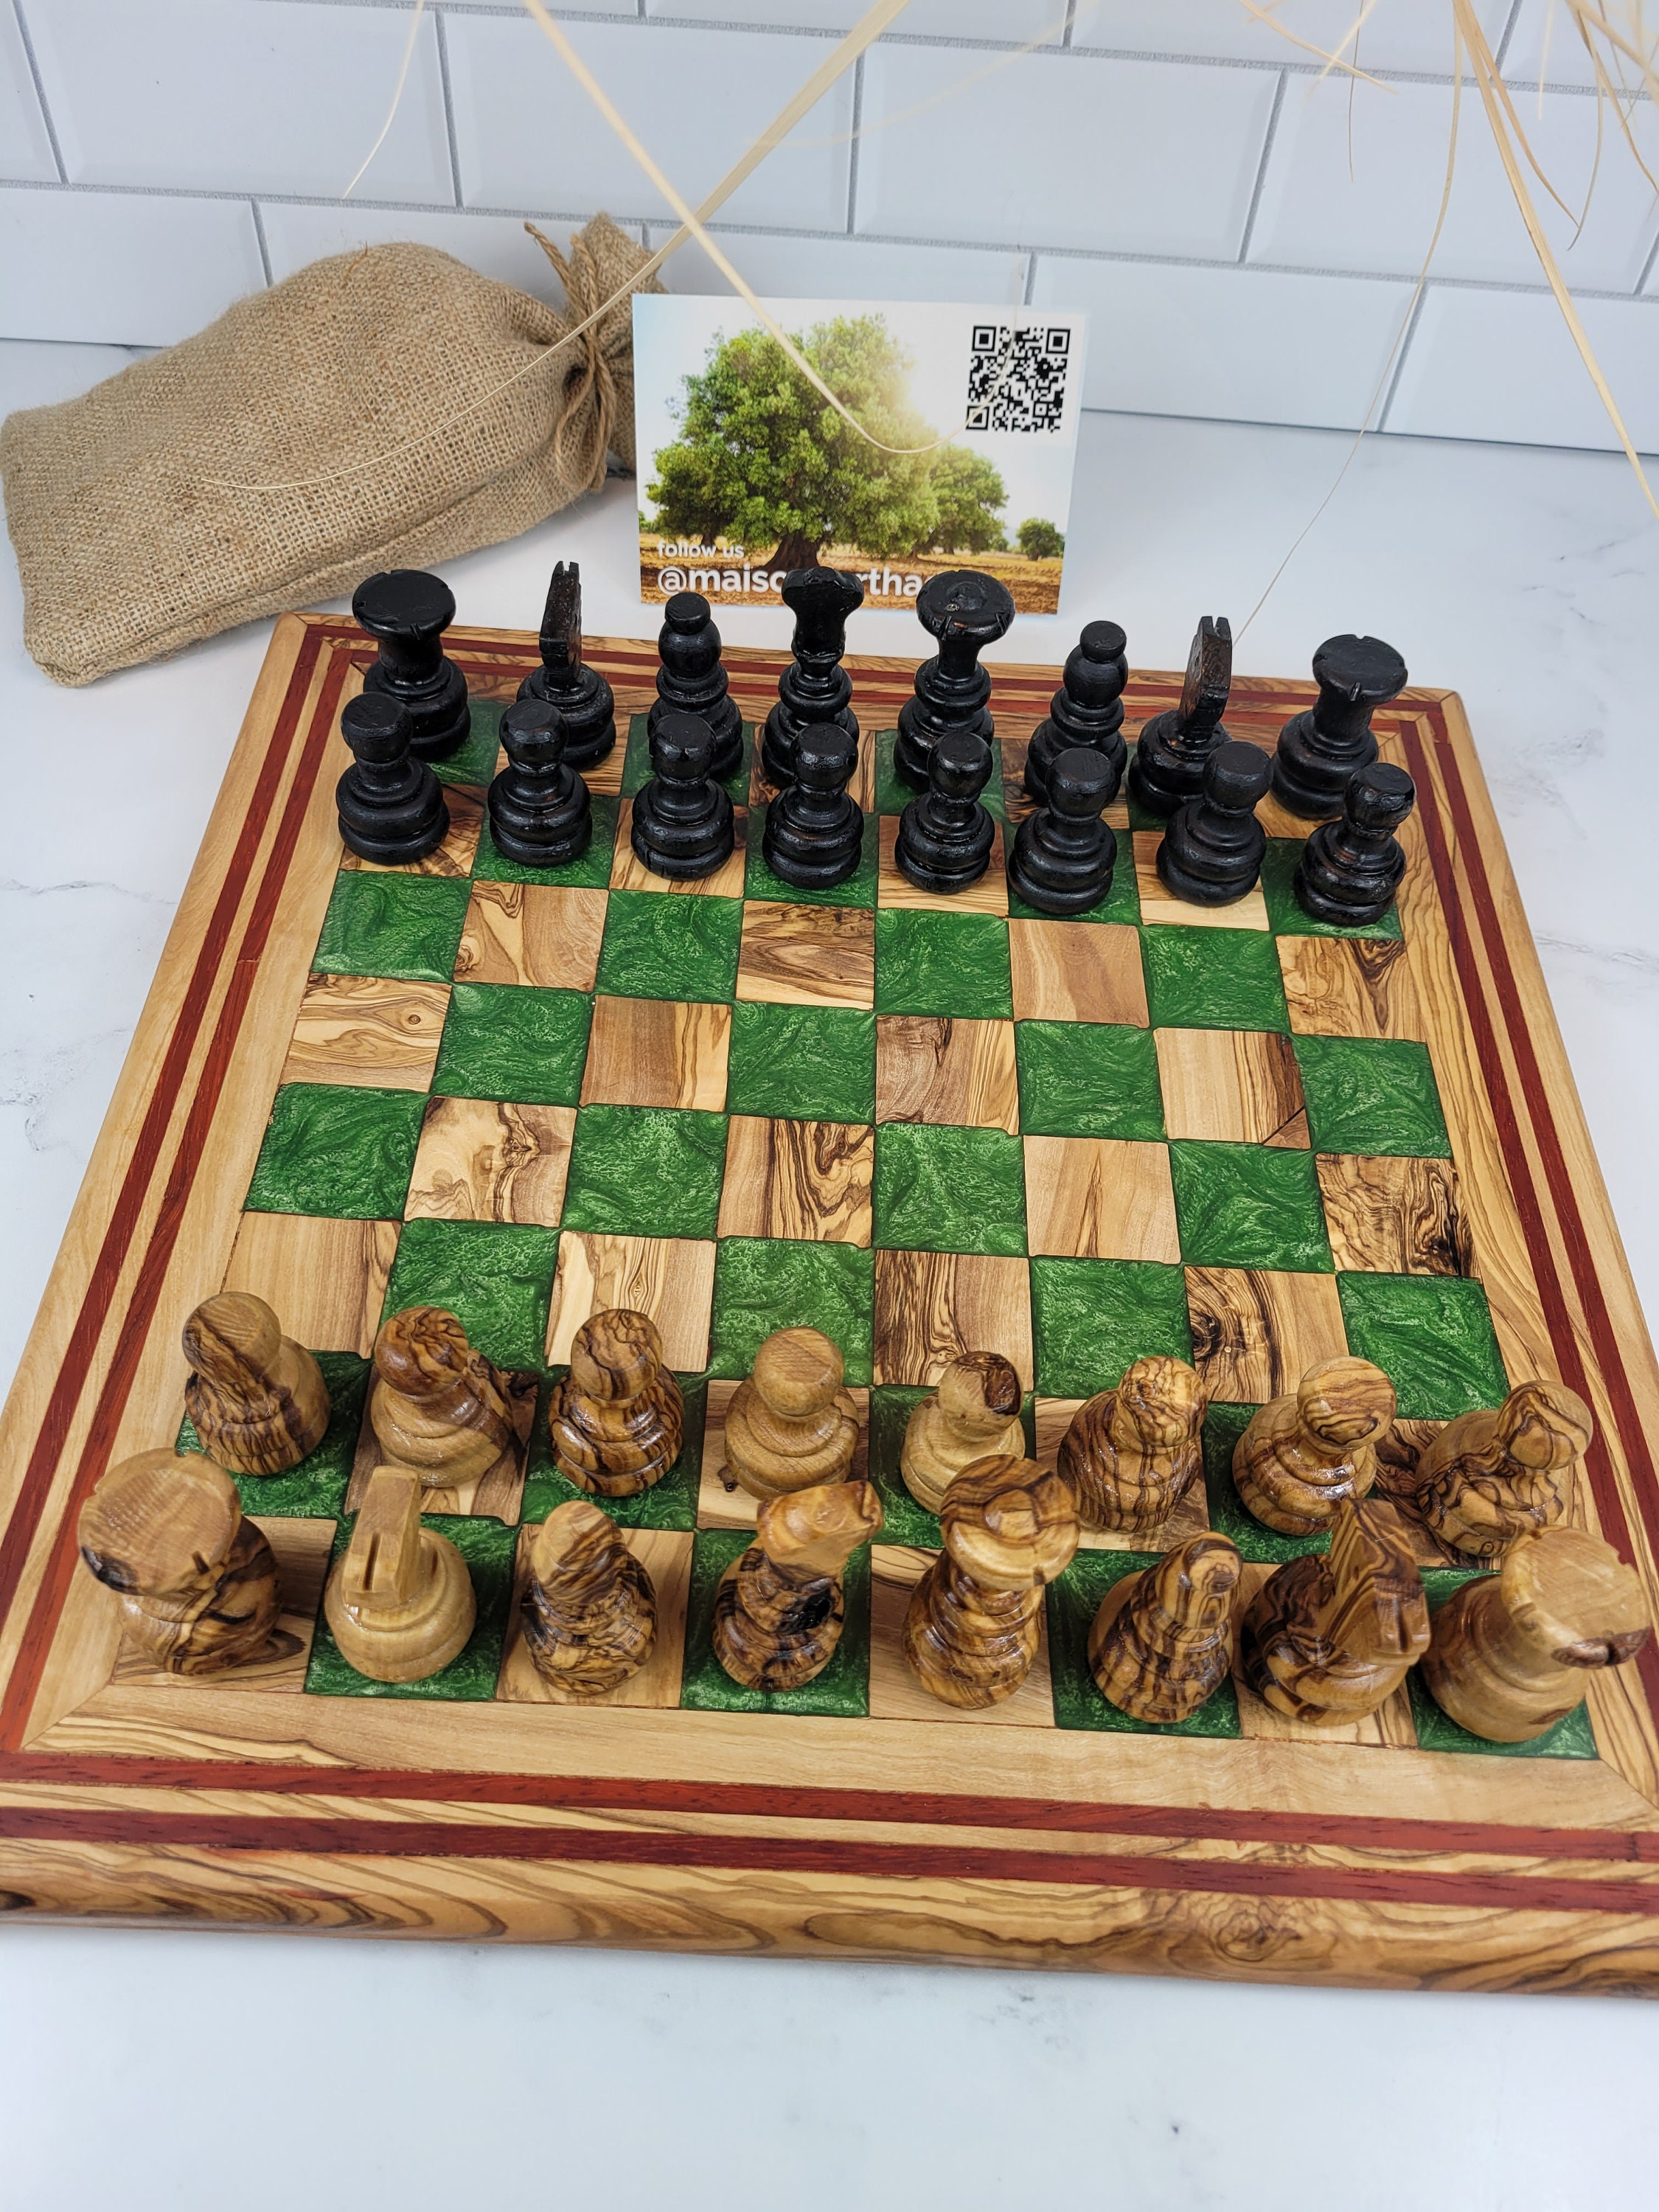 Knights of Cypress – Play Chess in Cypress Texas